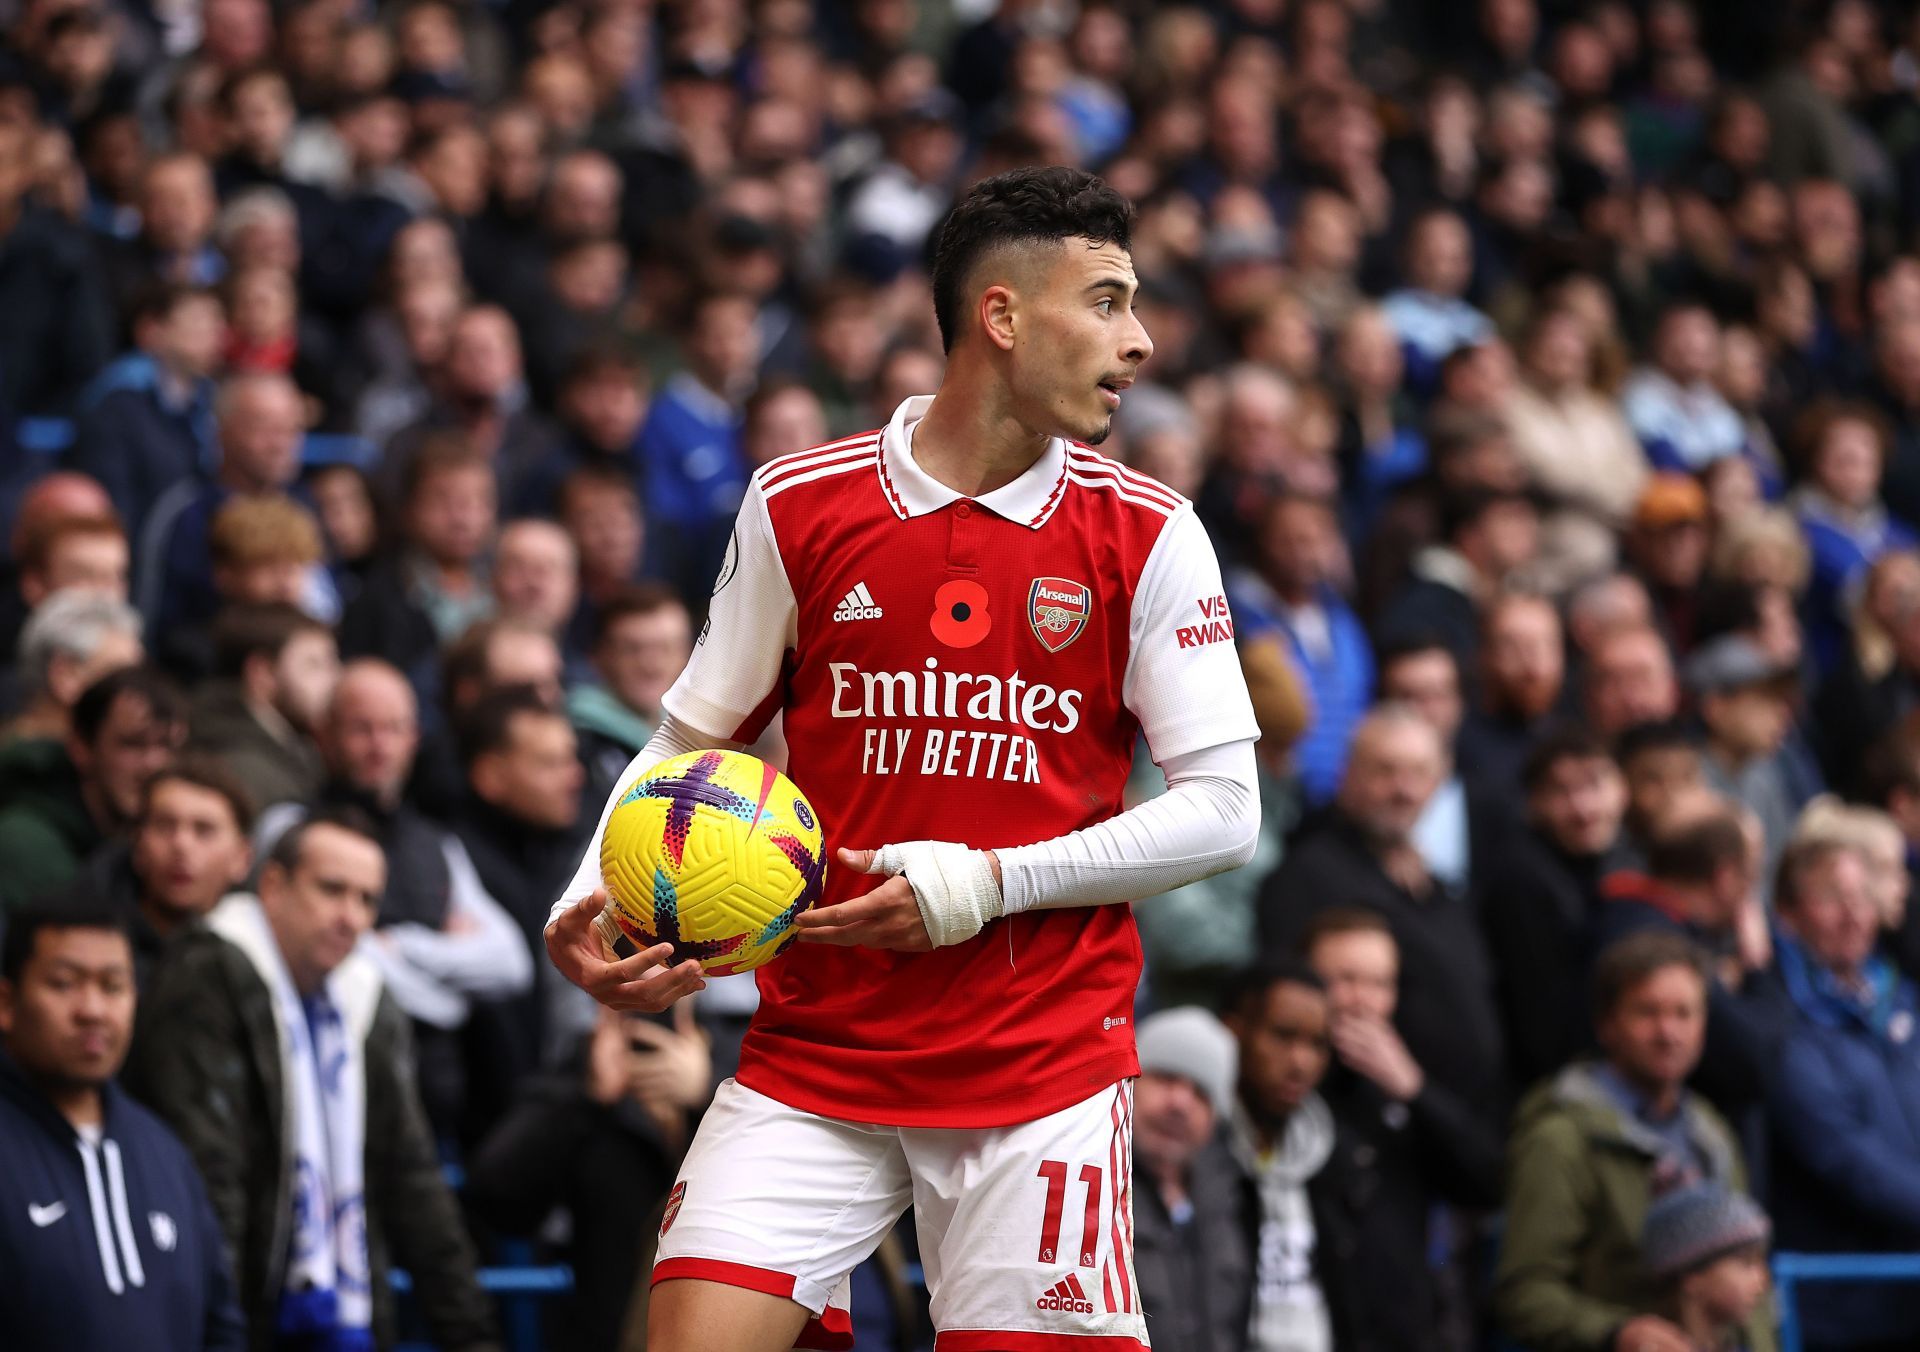 Gabriel Martinelli has caught the eye at the Emirates this season.